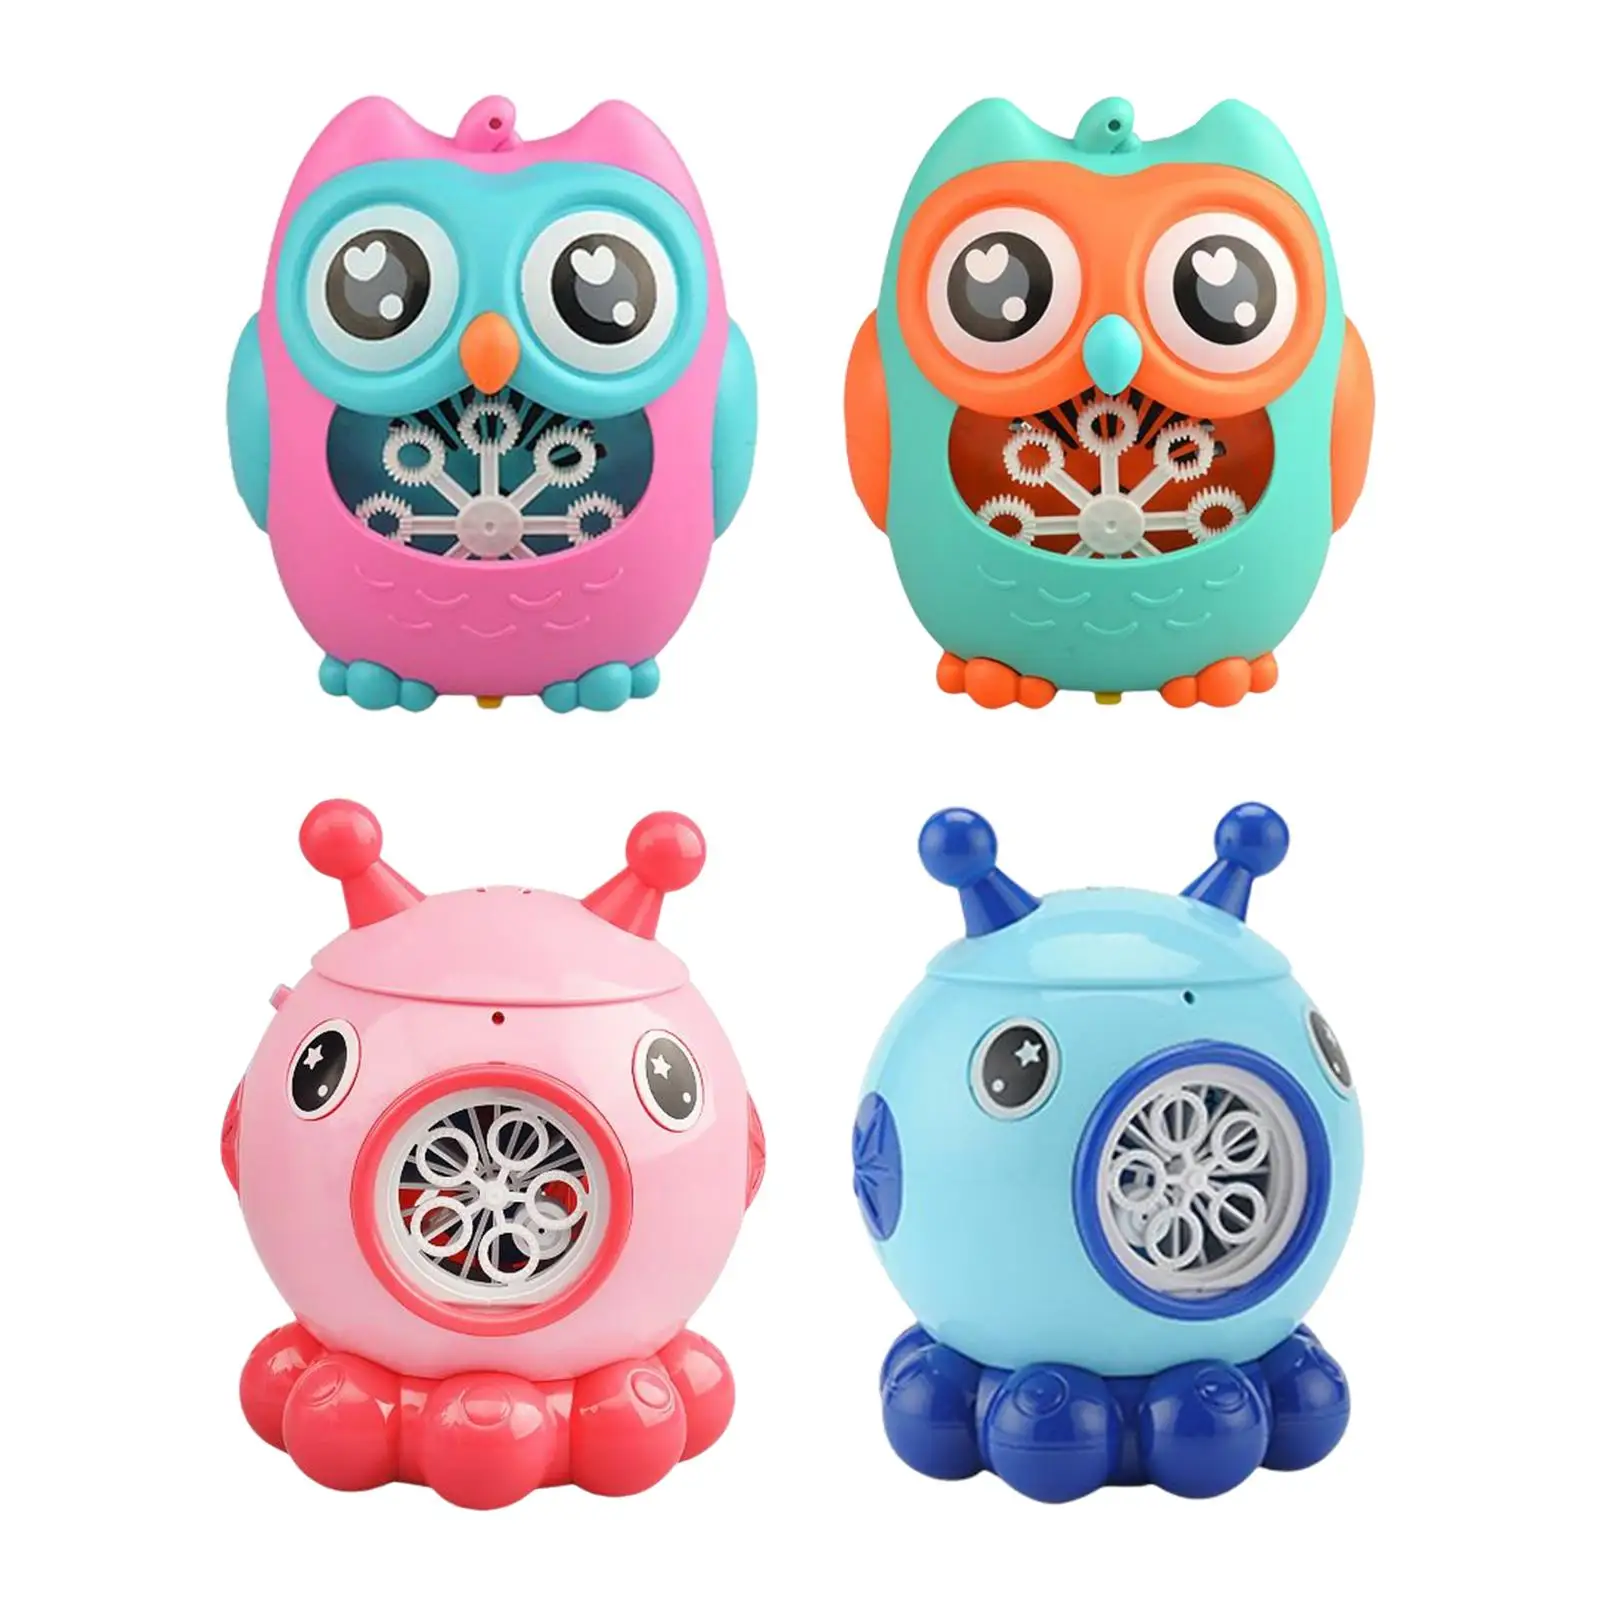 Bubble Blower Set, Electric W/ Music Lights Kid Gift Owl Octopus Options Bubble Gun for Outdoor